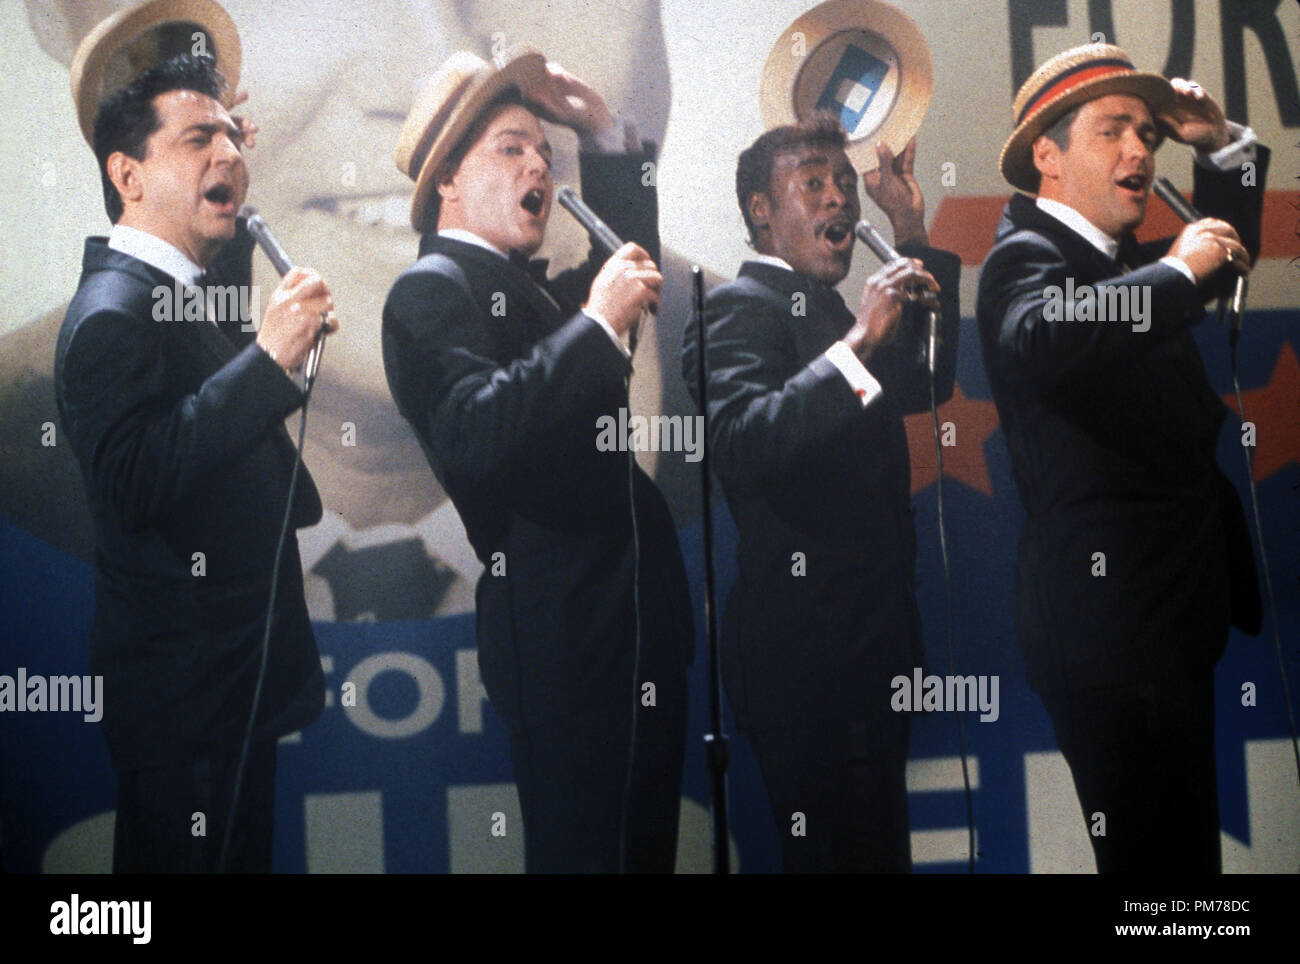 Film Still from 'The Rat Pack' Joe Mantegna, Ray Liotta, Don Cheadle, Angus MacFadyen 1998 Photo Credit: Stephen Vaughan   File Reference # 30996293THA  For Editorial Use Only -  All Rights Reserved Stock Photo